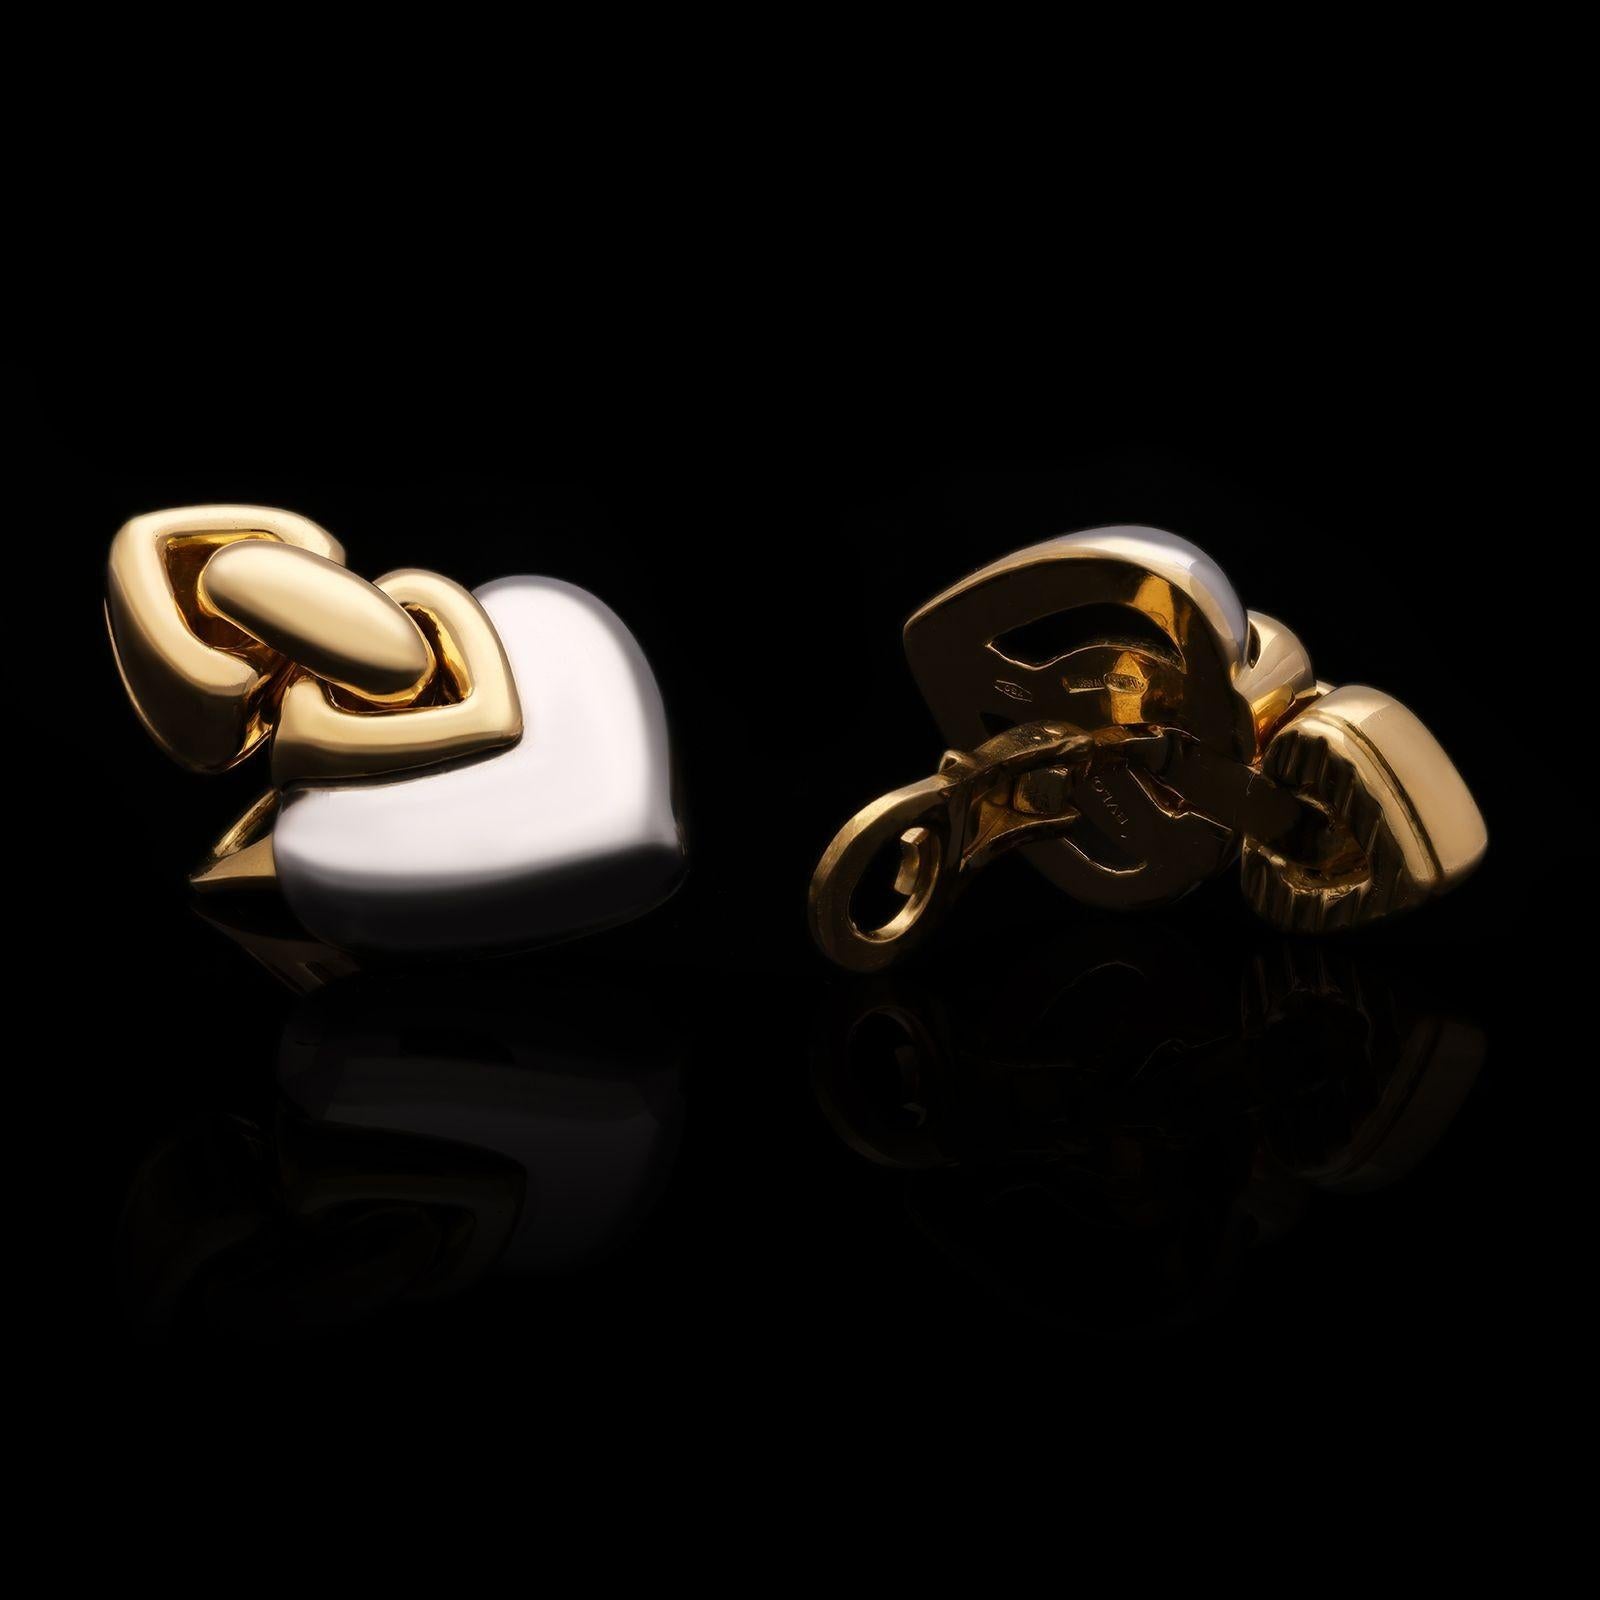 A pair of vintage gold and stainless steel ‘Doppio Cuore’ earrings by Bulgari c.1990s, formed of a stainless steel heart shaped motif inlaid to the top with a smaller one in gold joined to a second gold one inverted above it, with clip fittings to